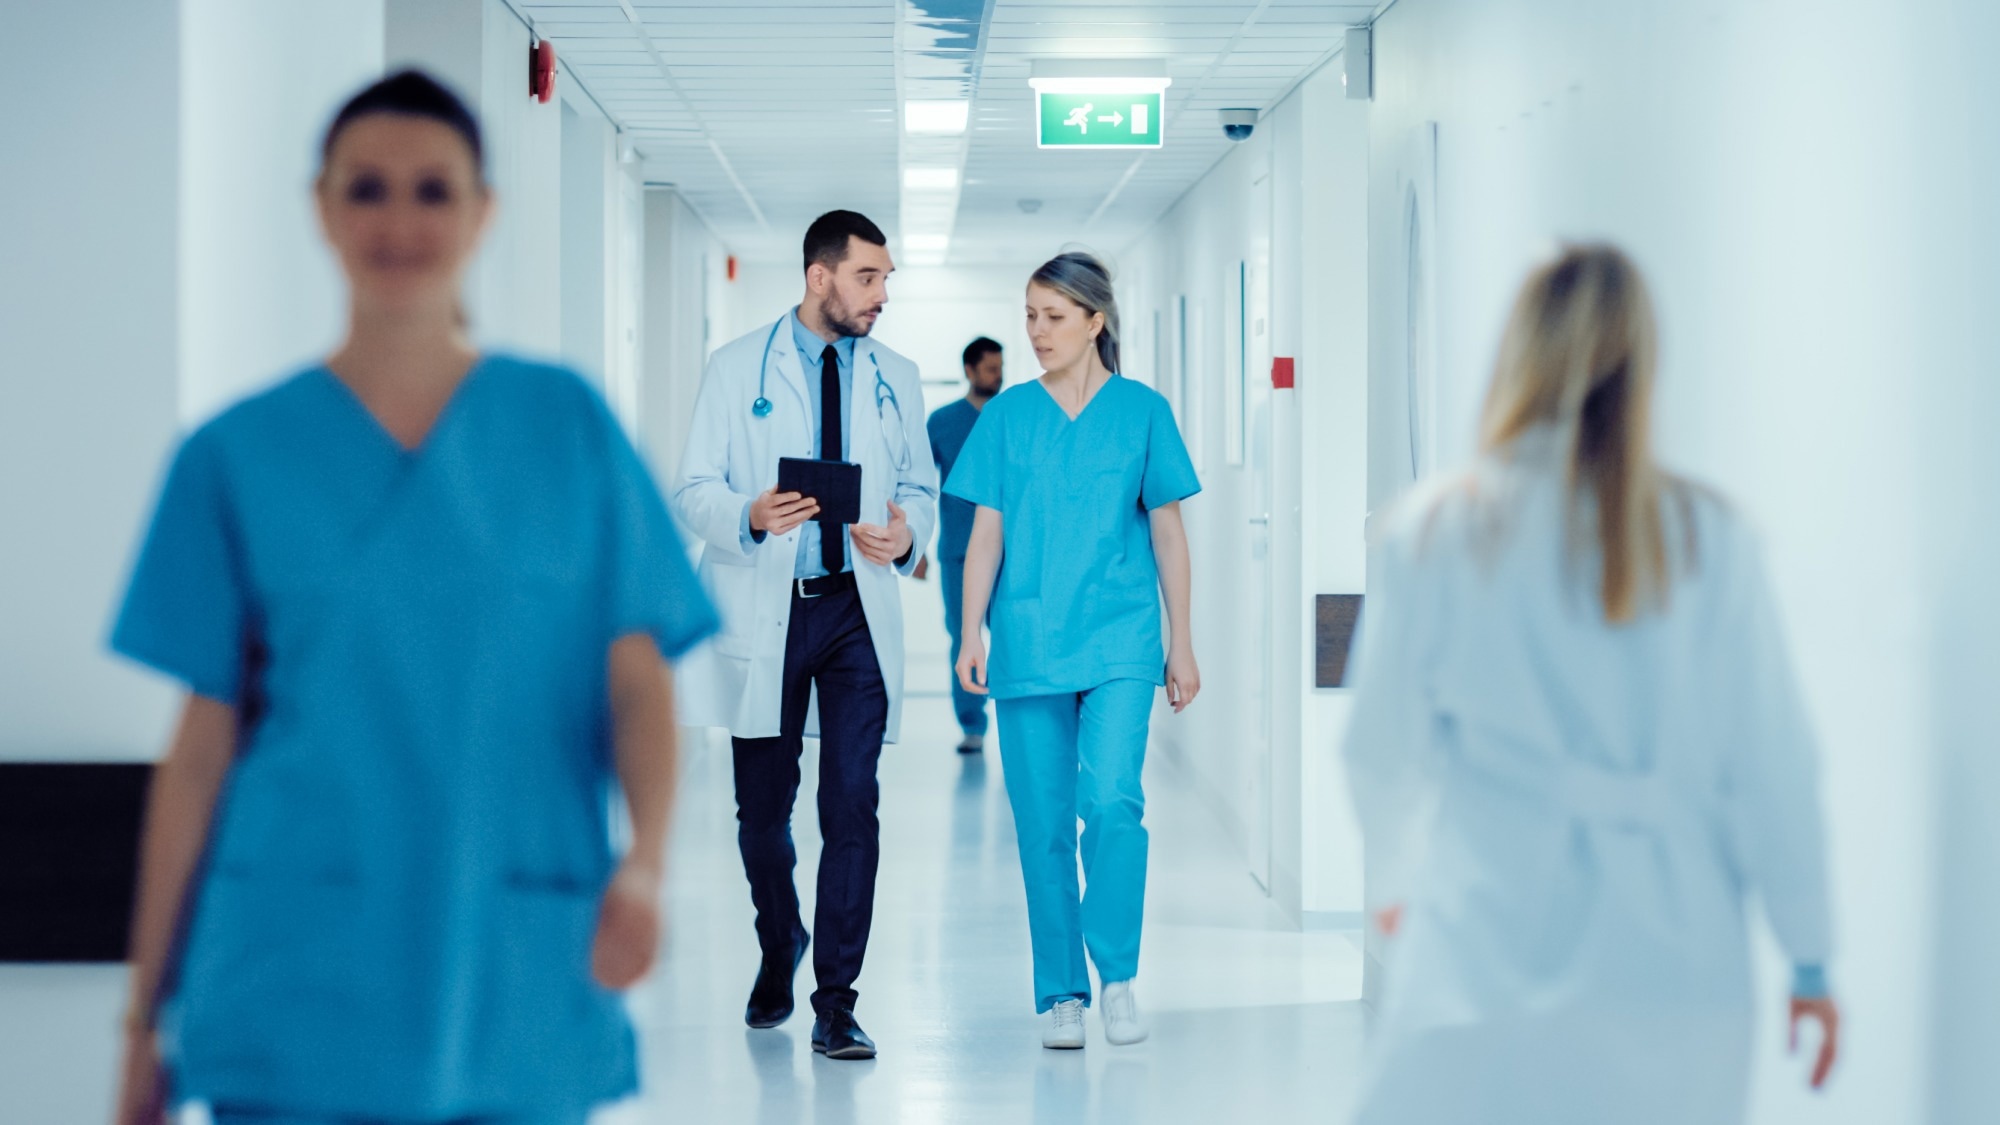 Study: Post-acute health care burden after SARS-CoV-2 infection: a retrospective cohort study. Image Credit: Gorodenkoff/Shutterstock